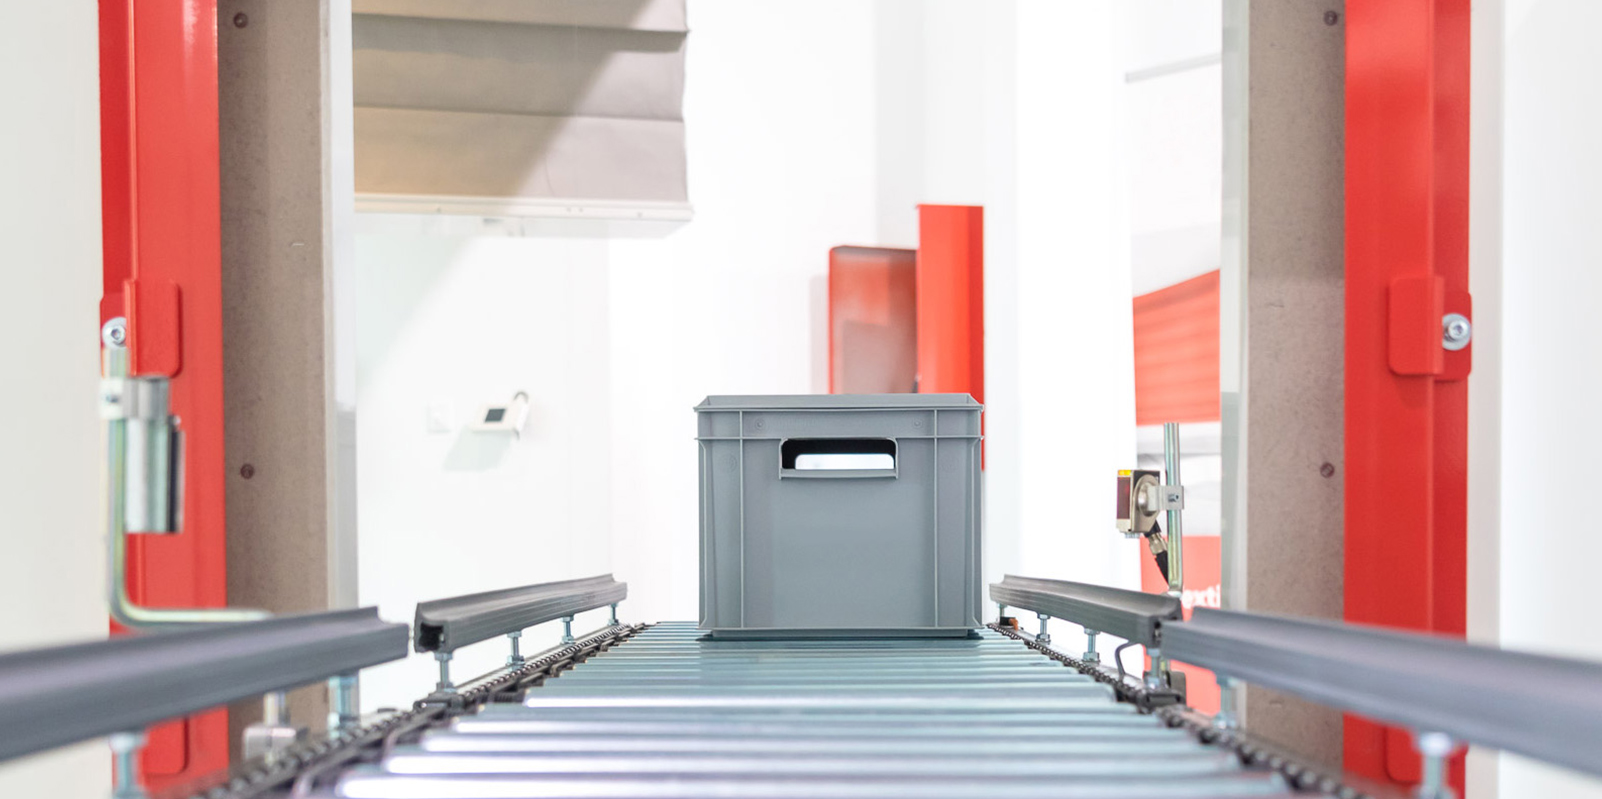 Fire protection solutions from STÖBICH